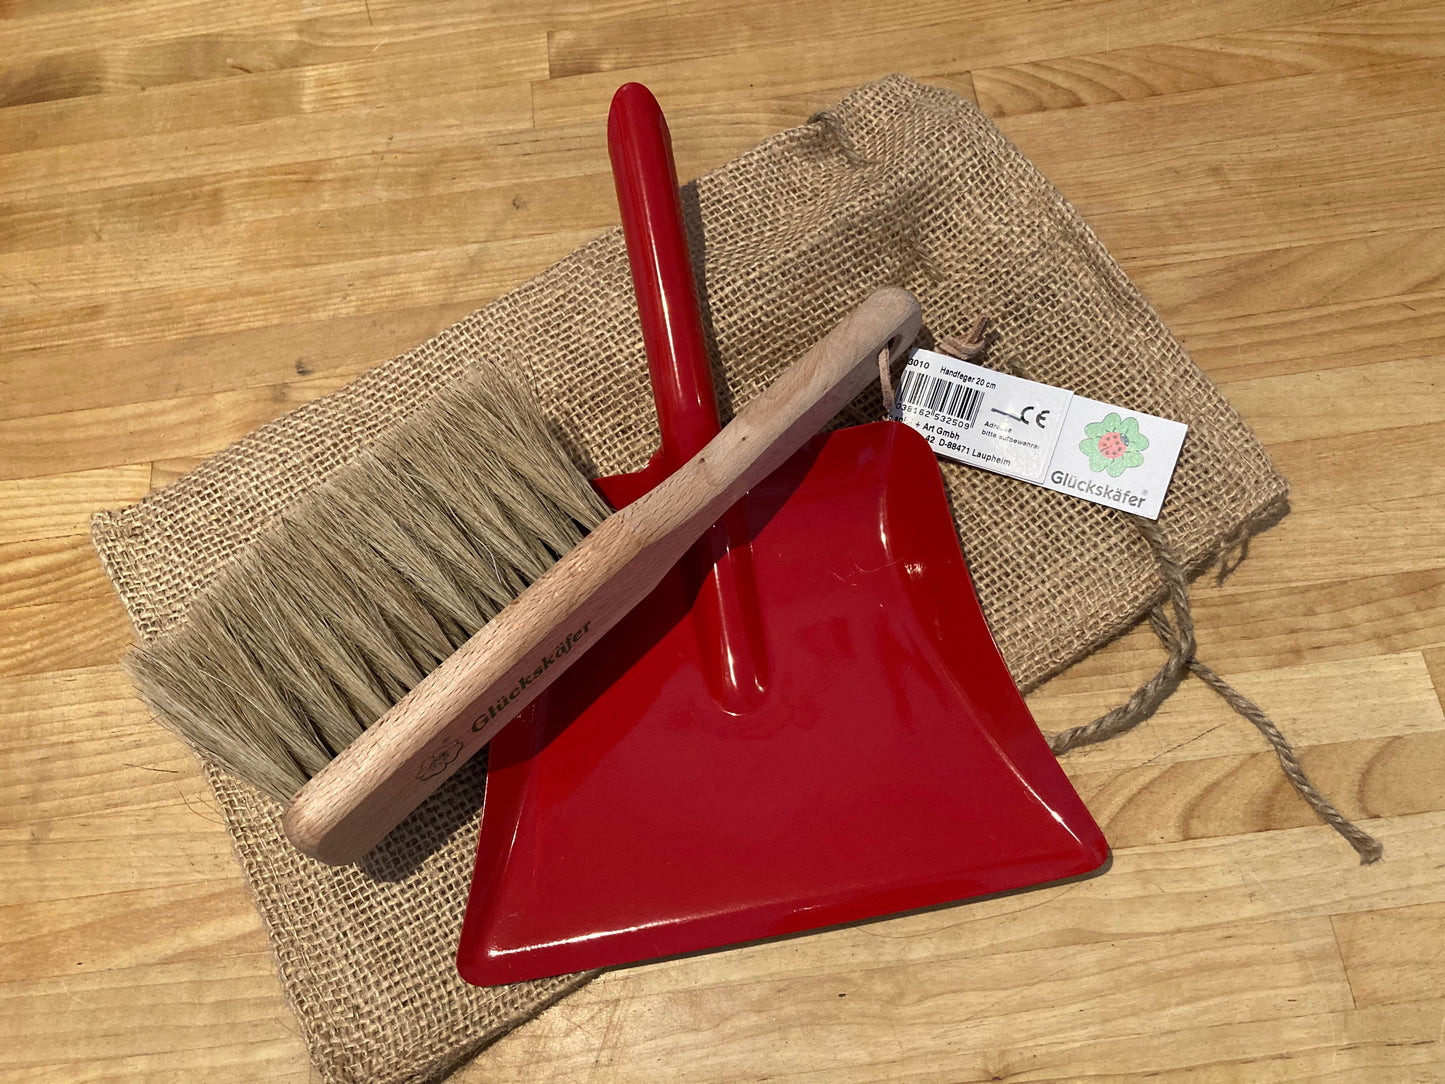 Child's Wood DUST BRUSH and Red Metal DUST PAN